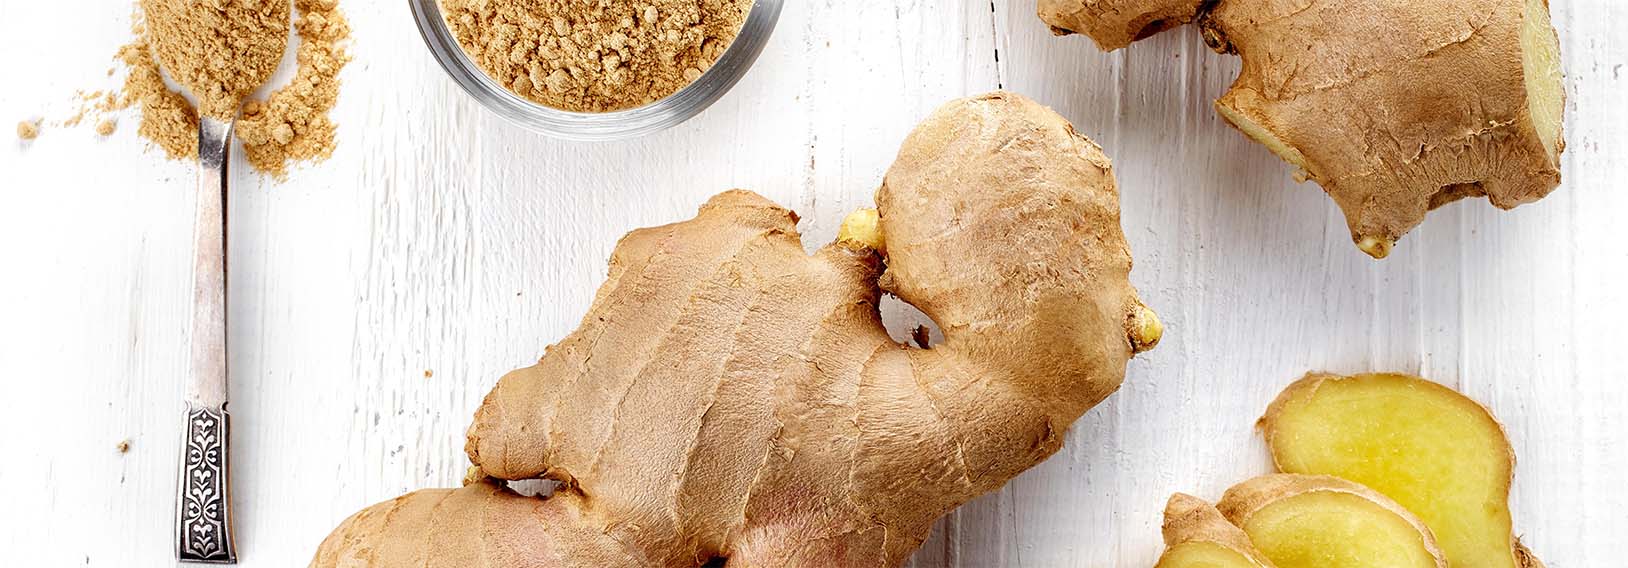 10 Truly Fun And Interesting Ginger Facts Thats It Nutrition 